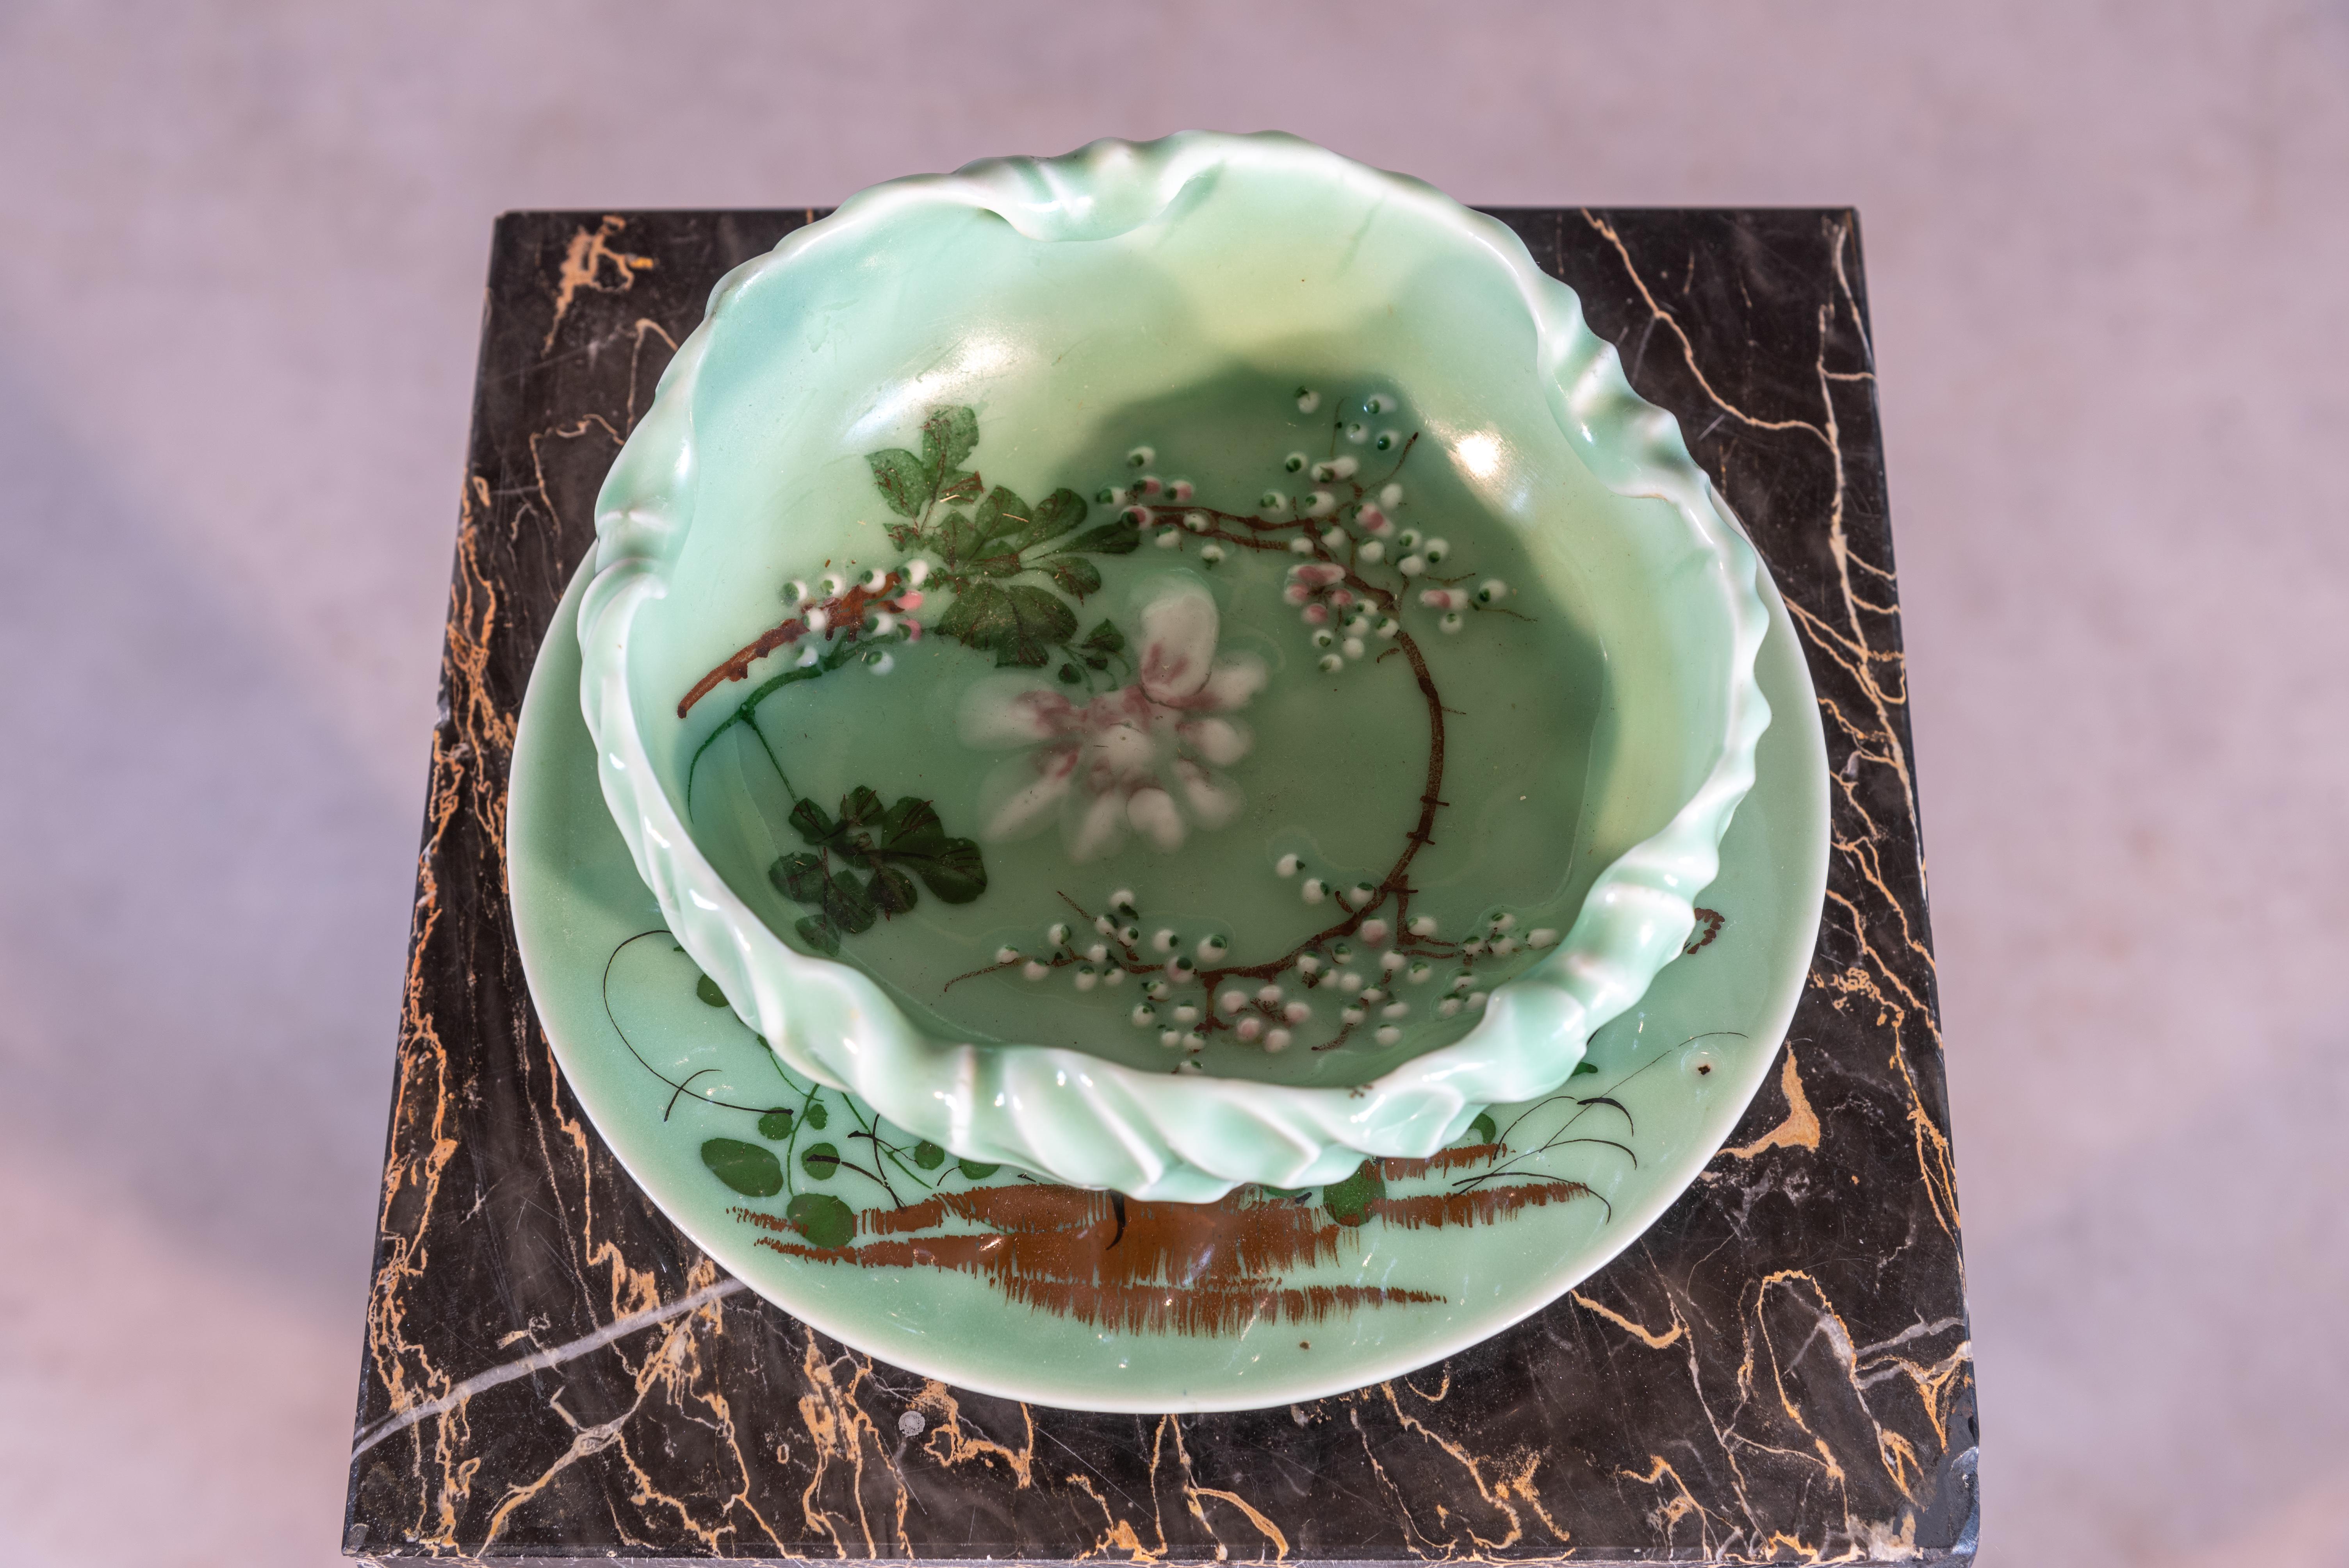 Crafted in the early 20th century, this French Celadon Bowl and Plate duo encapsulates the enduring allure of Art Nouveau aesthetics. The delicate celadon glaze, with its nuanced green tones, serves as a captivating canvas for the intricate flower